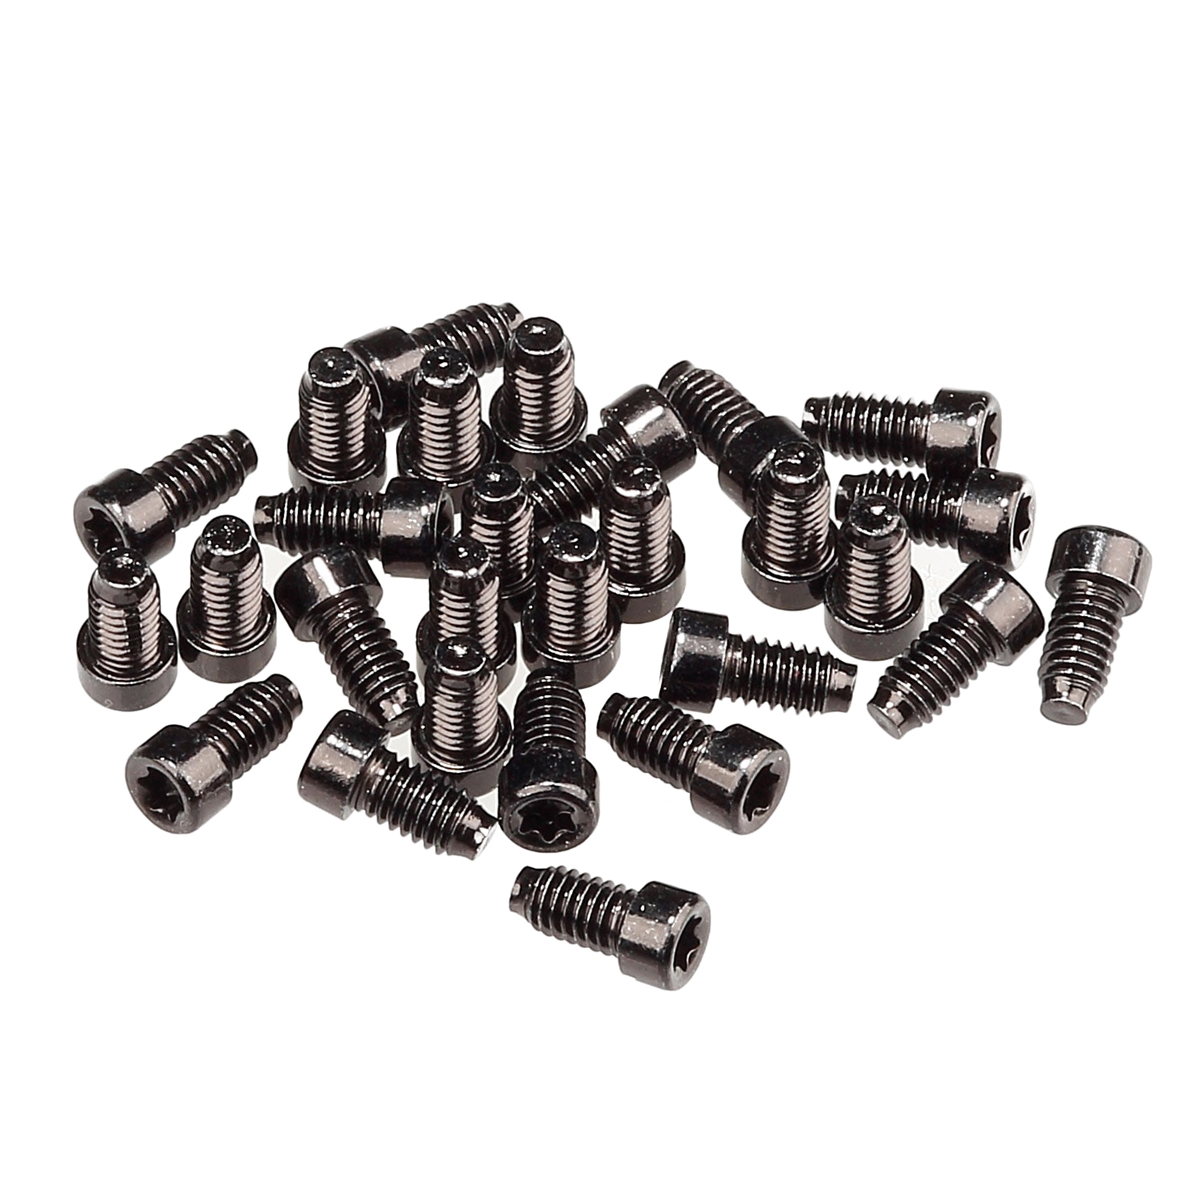 Spare short pin kit (7mm) for Spoon, Spike, Oozy pedals